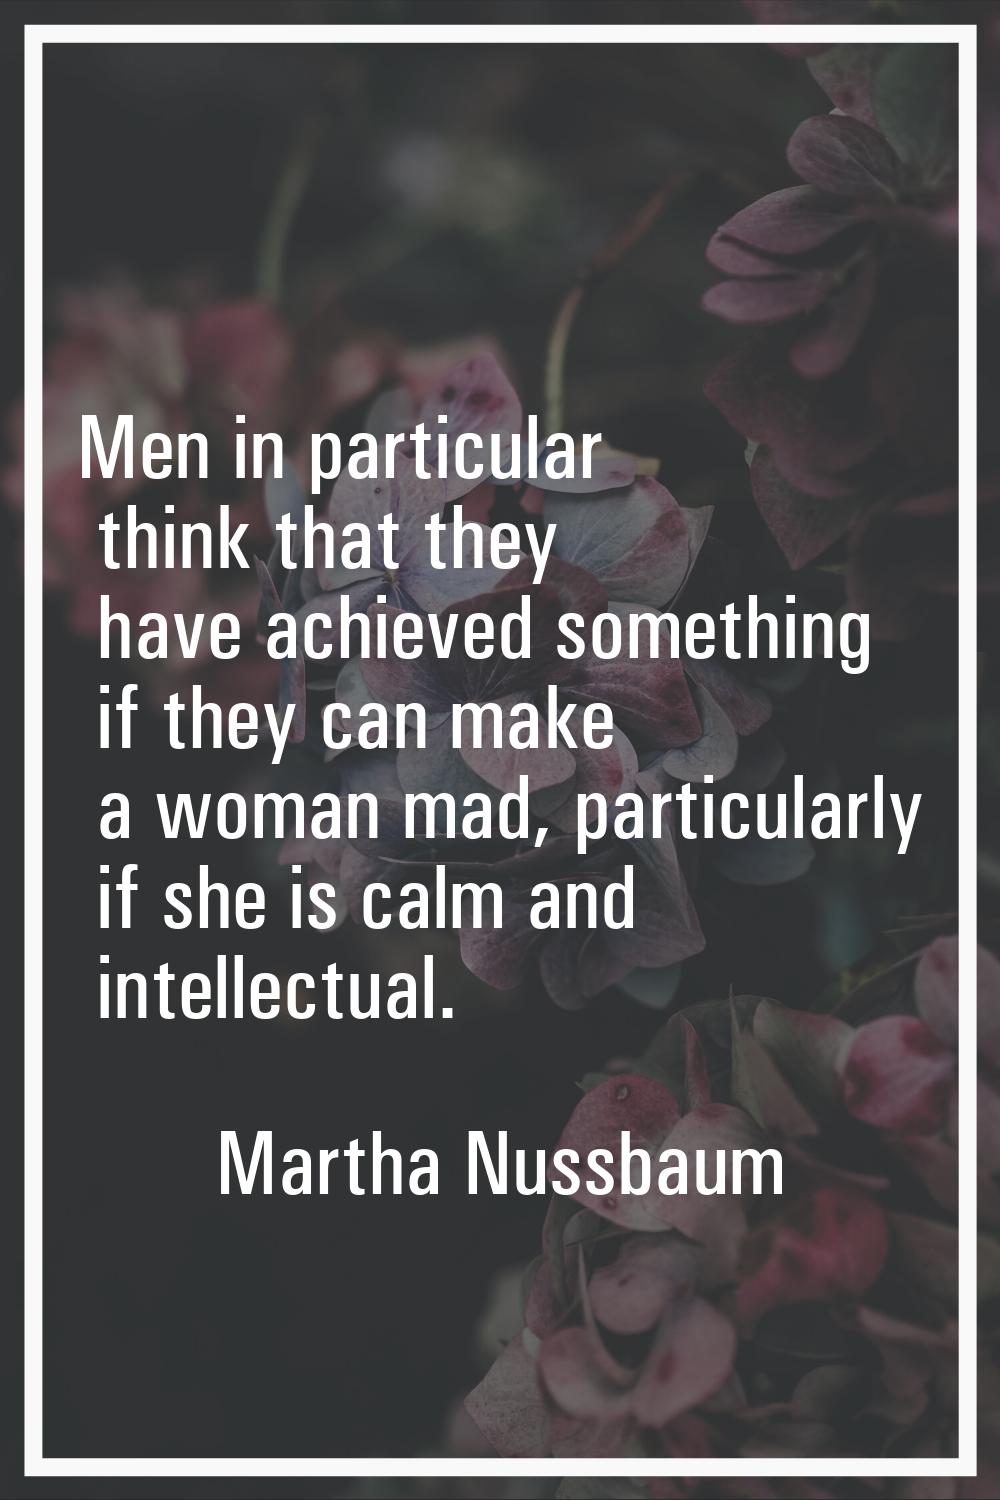 Men in particular think that they have achieved something if they can make a woman mad, particularl